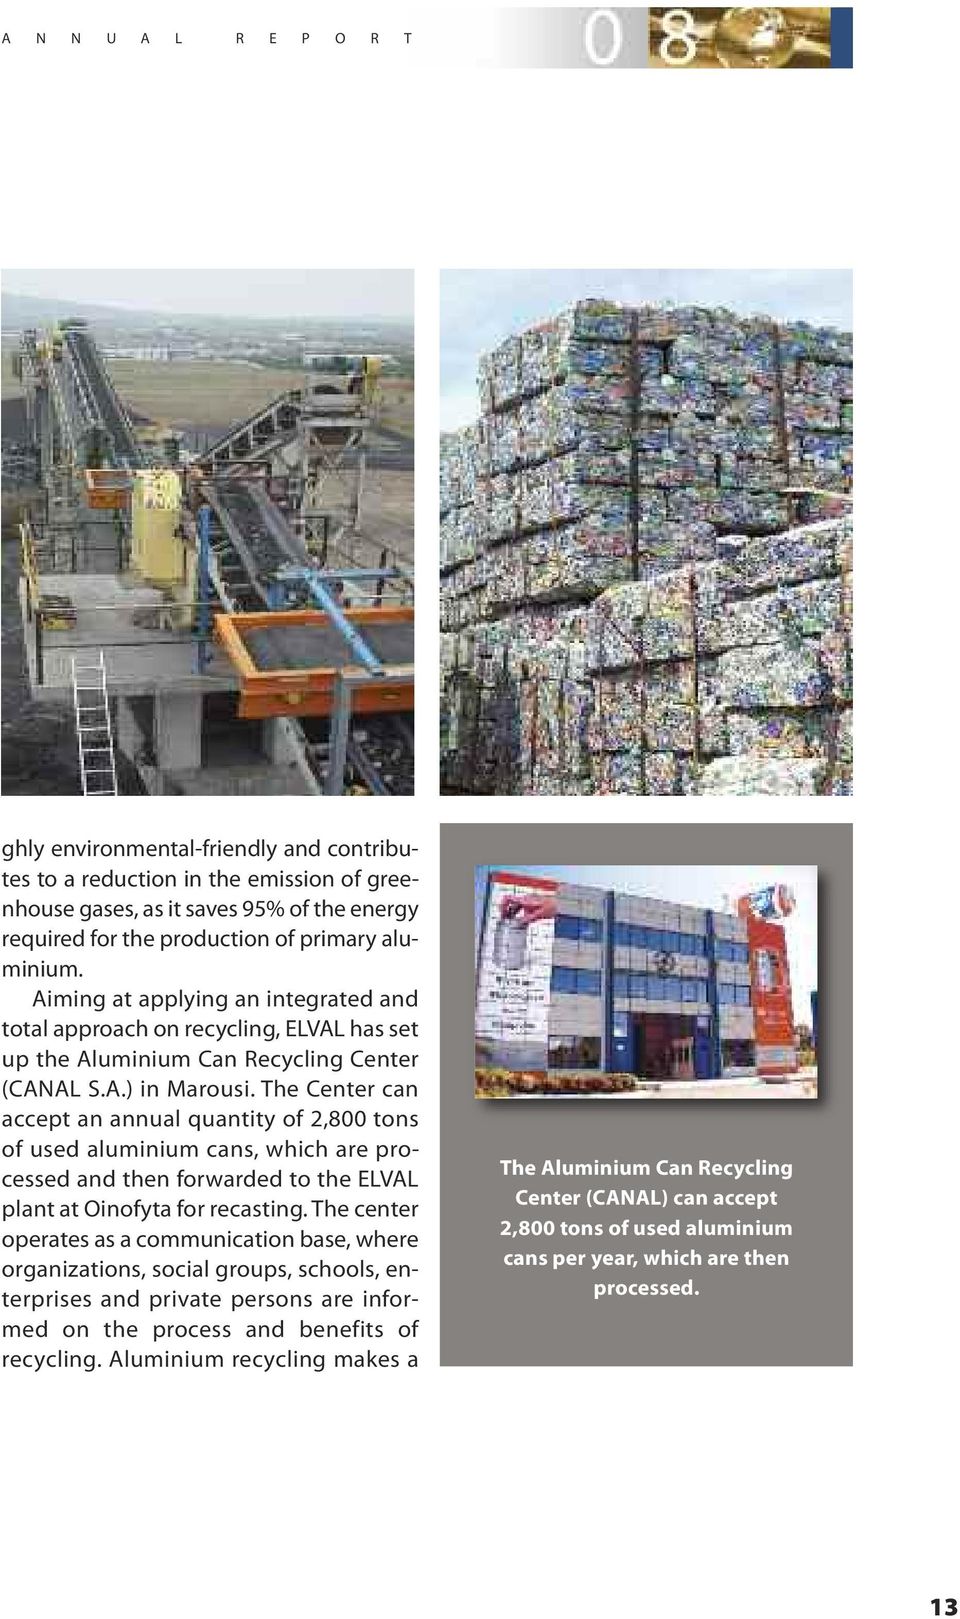 The Center can accept an annual quantity of 2,800 tons of used aluminium cans, which are processed and then forwarded to the ELVAL plant at Oinofyta for recasting.